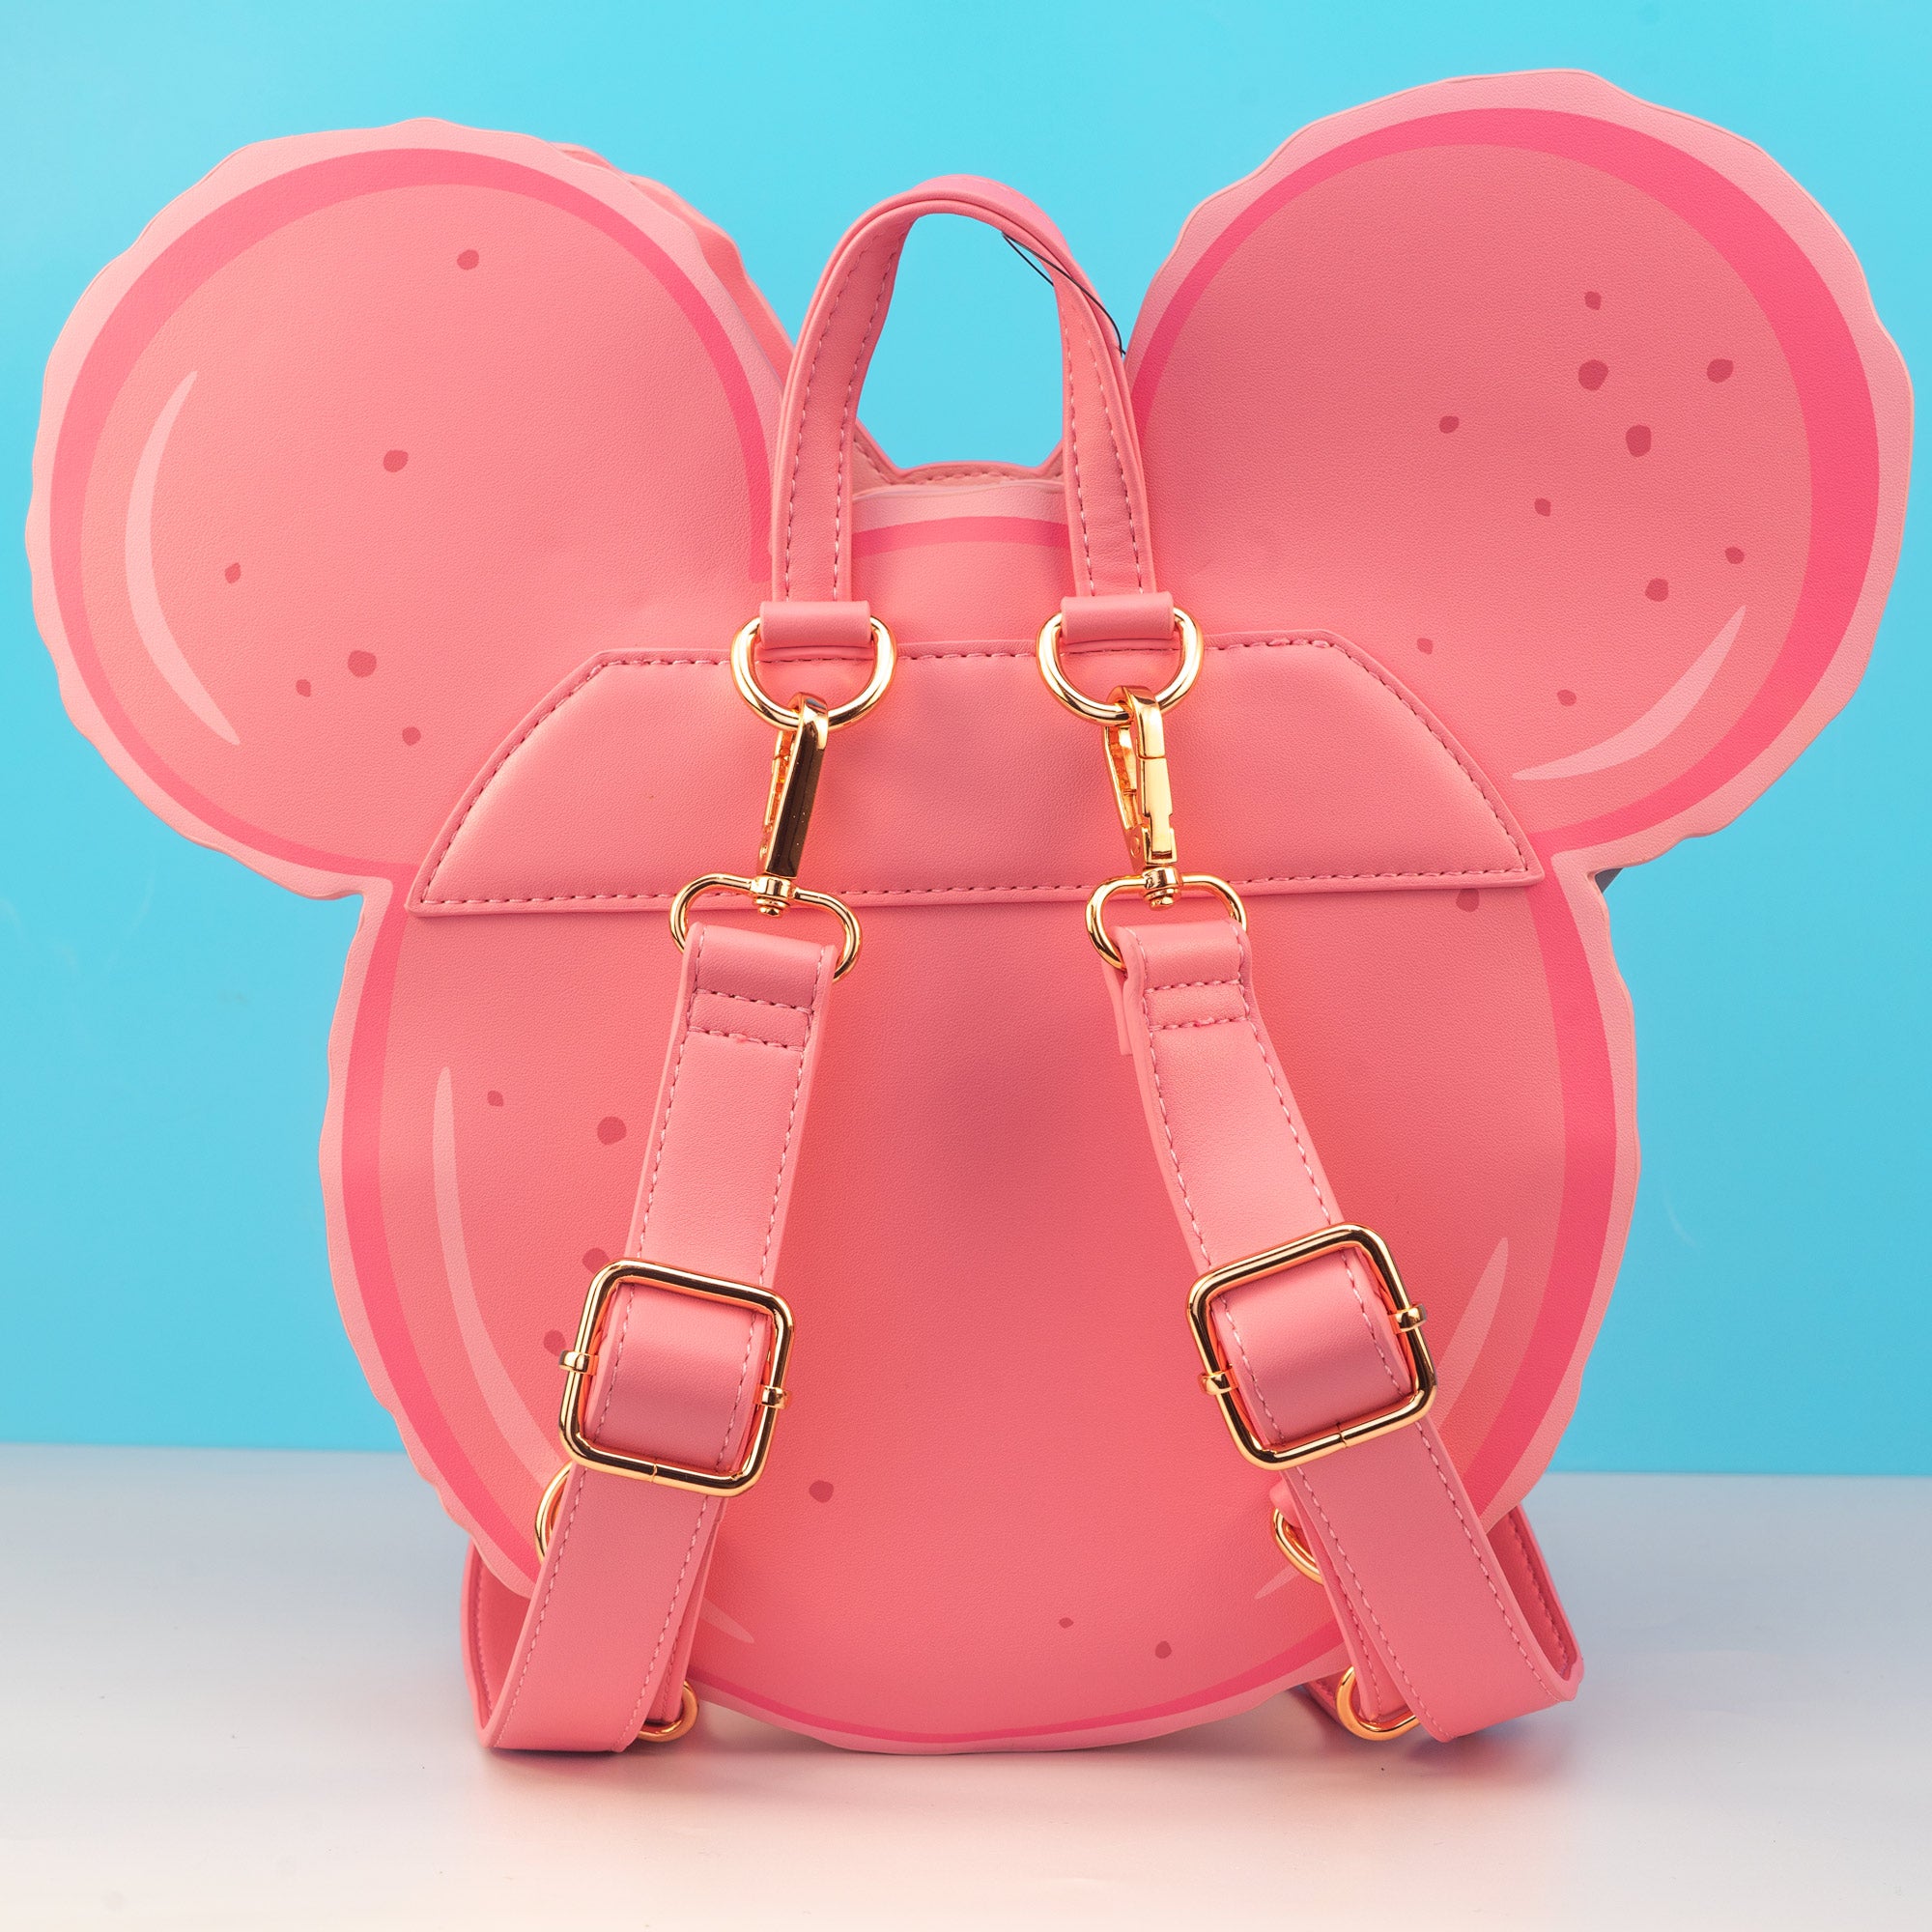 Loungefly x Disney Minnie Mouse Macaron Convertible Crossbody Backpack